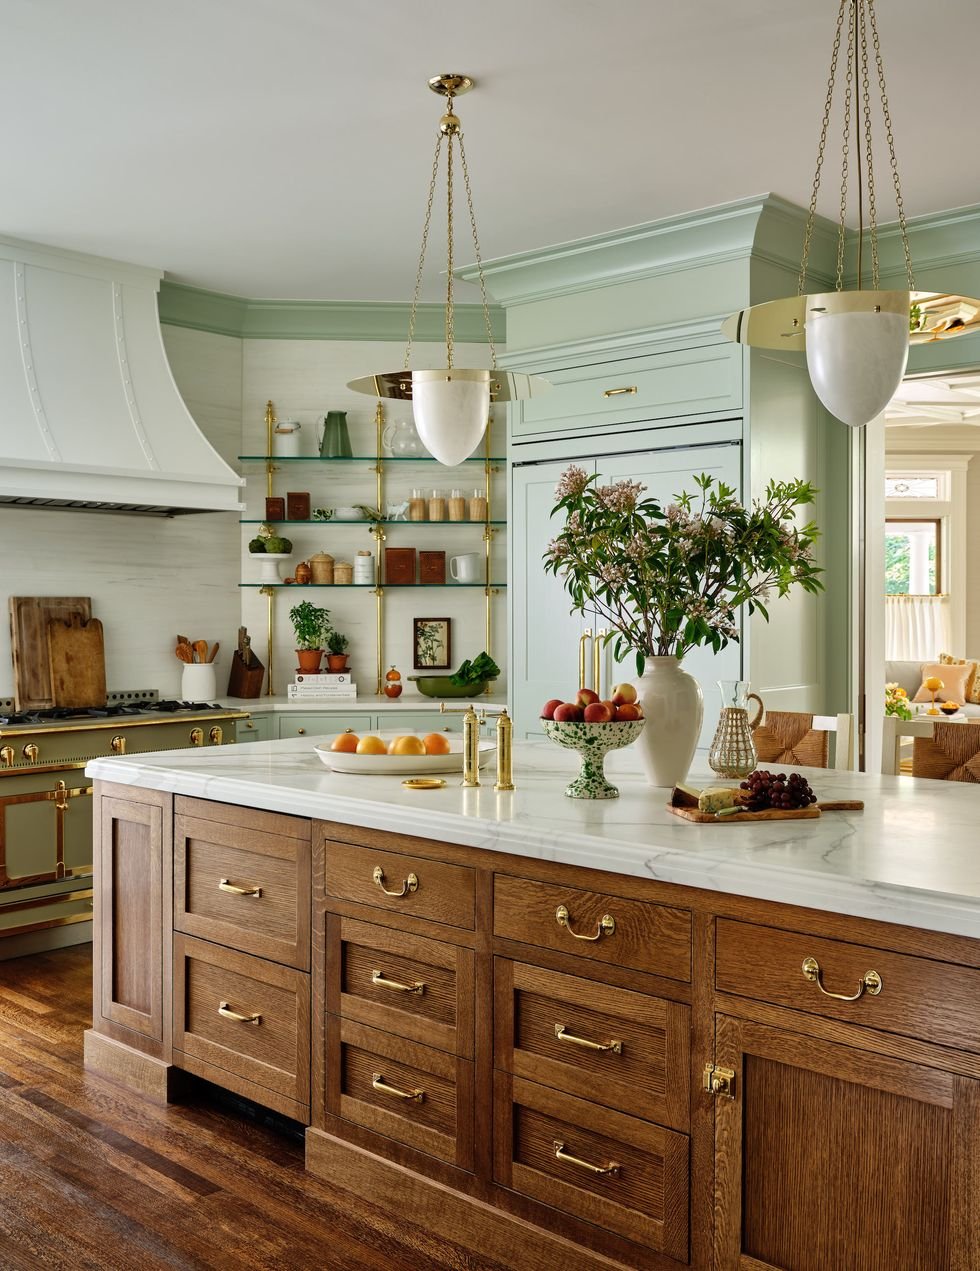 larchmont-by-chaunceyboothby-010-kitchen-6552564e738df.jpg